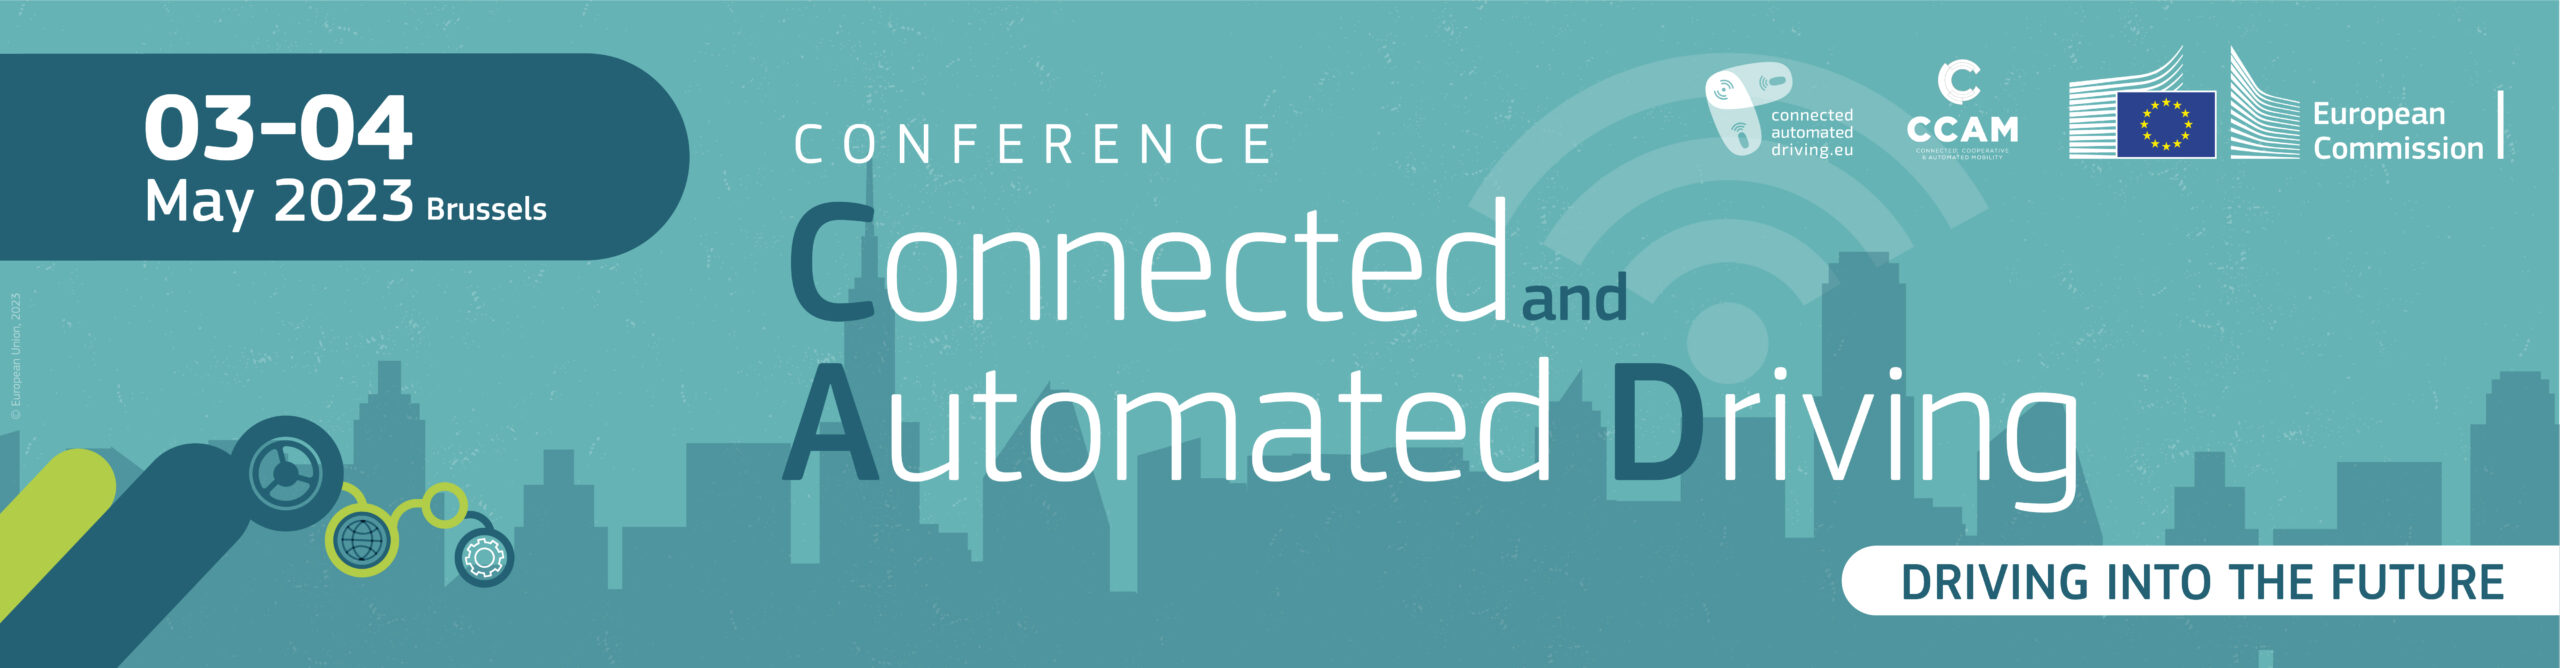 4th European Conference on Connected and Automated Driving – EUCAD 2023